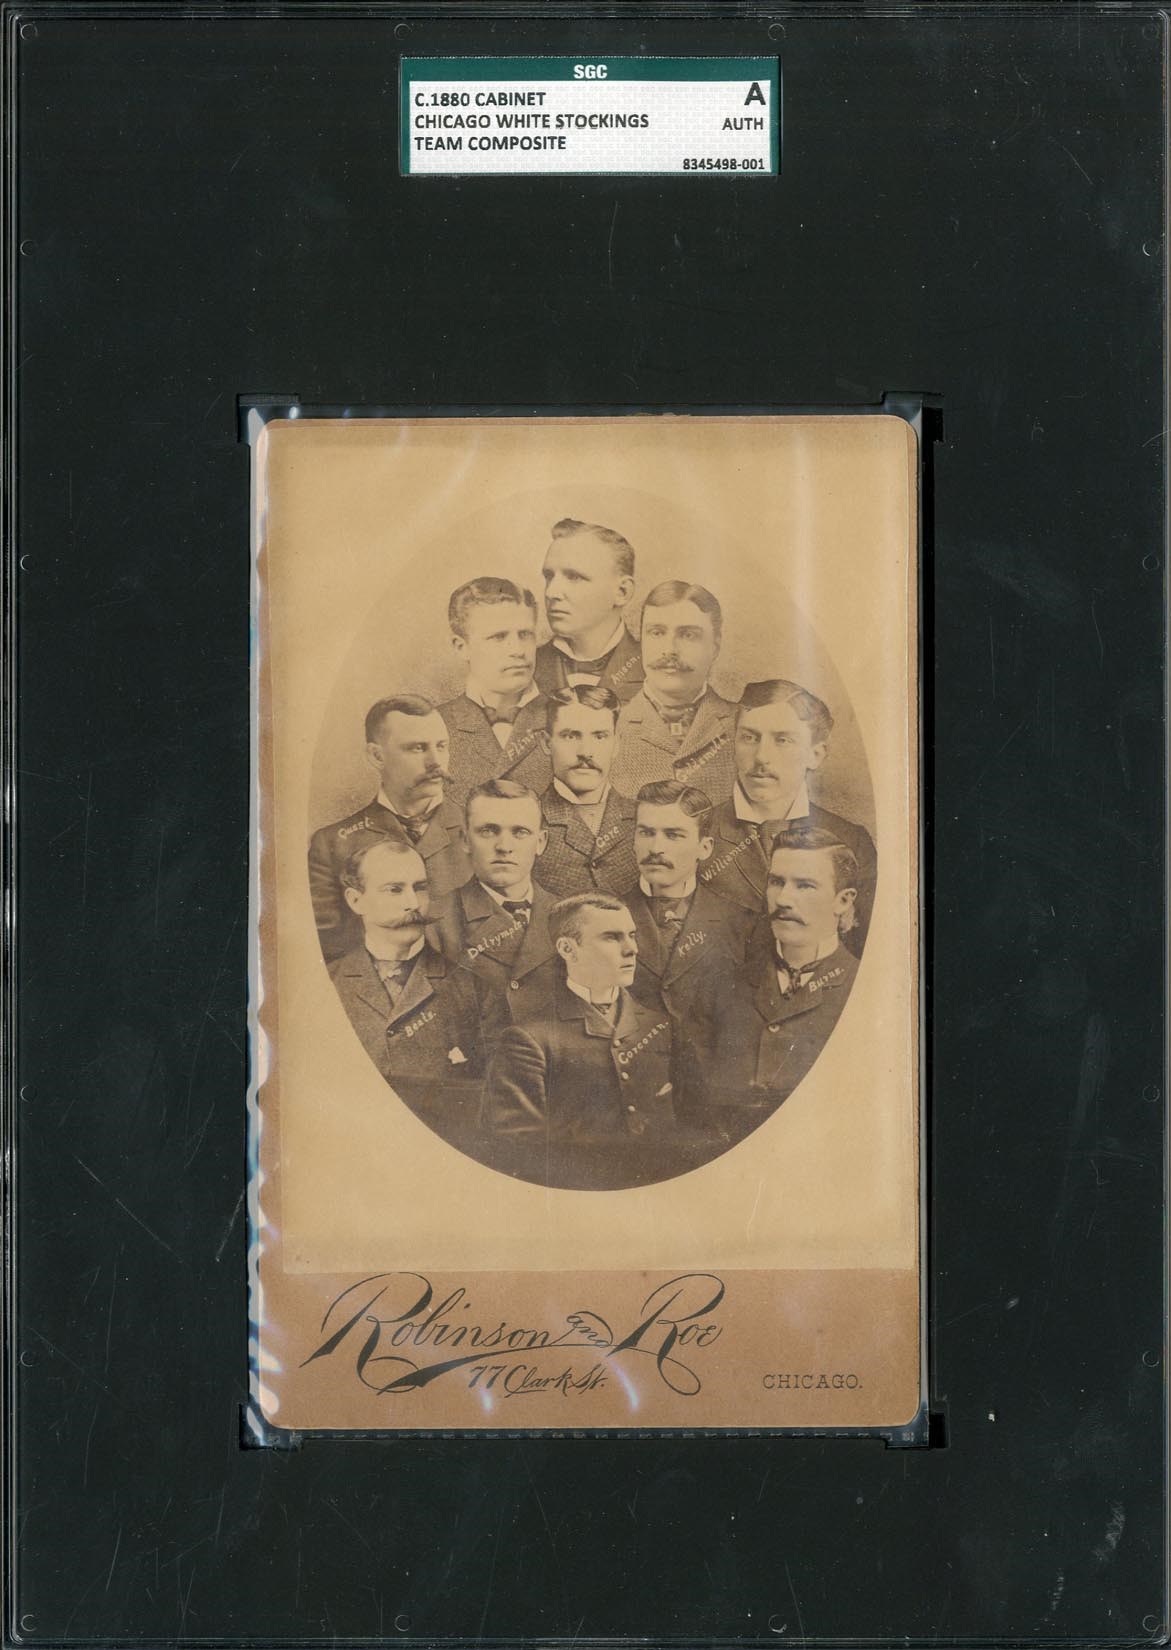 Early Baseball - 1880 Chicago White Stockings Cabinet Card (SGC)